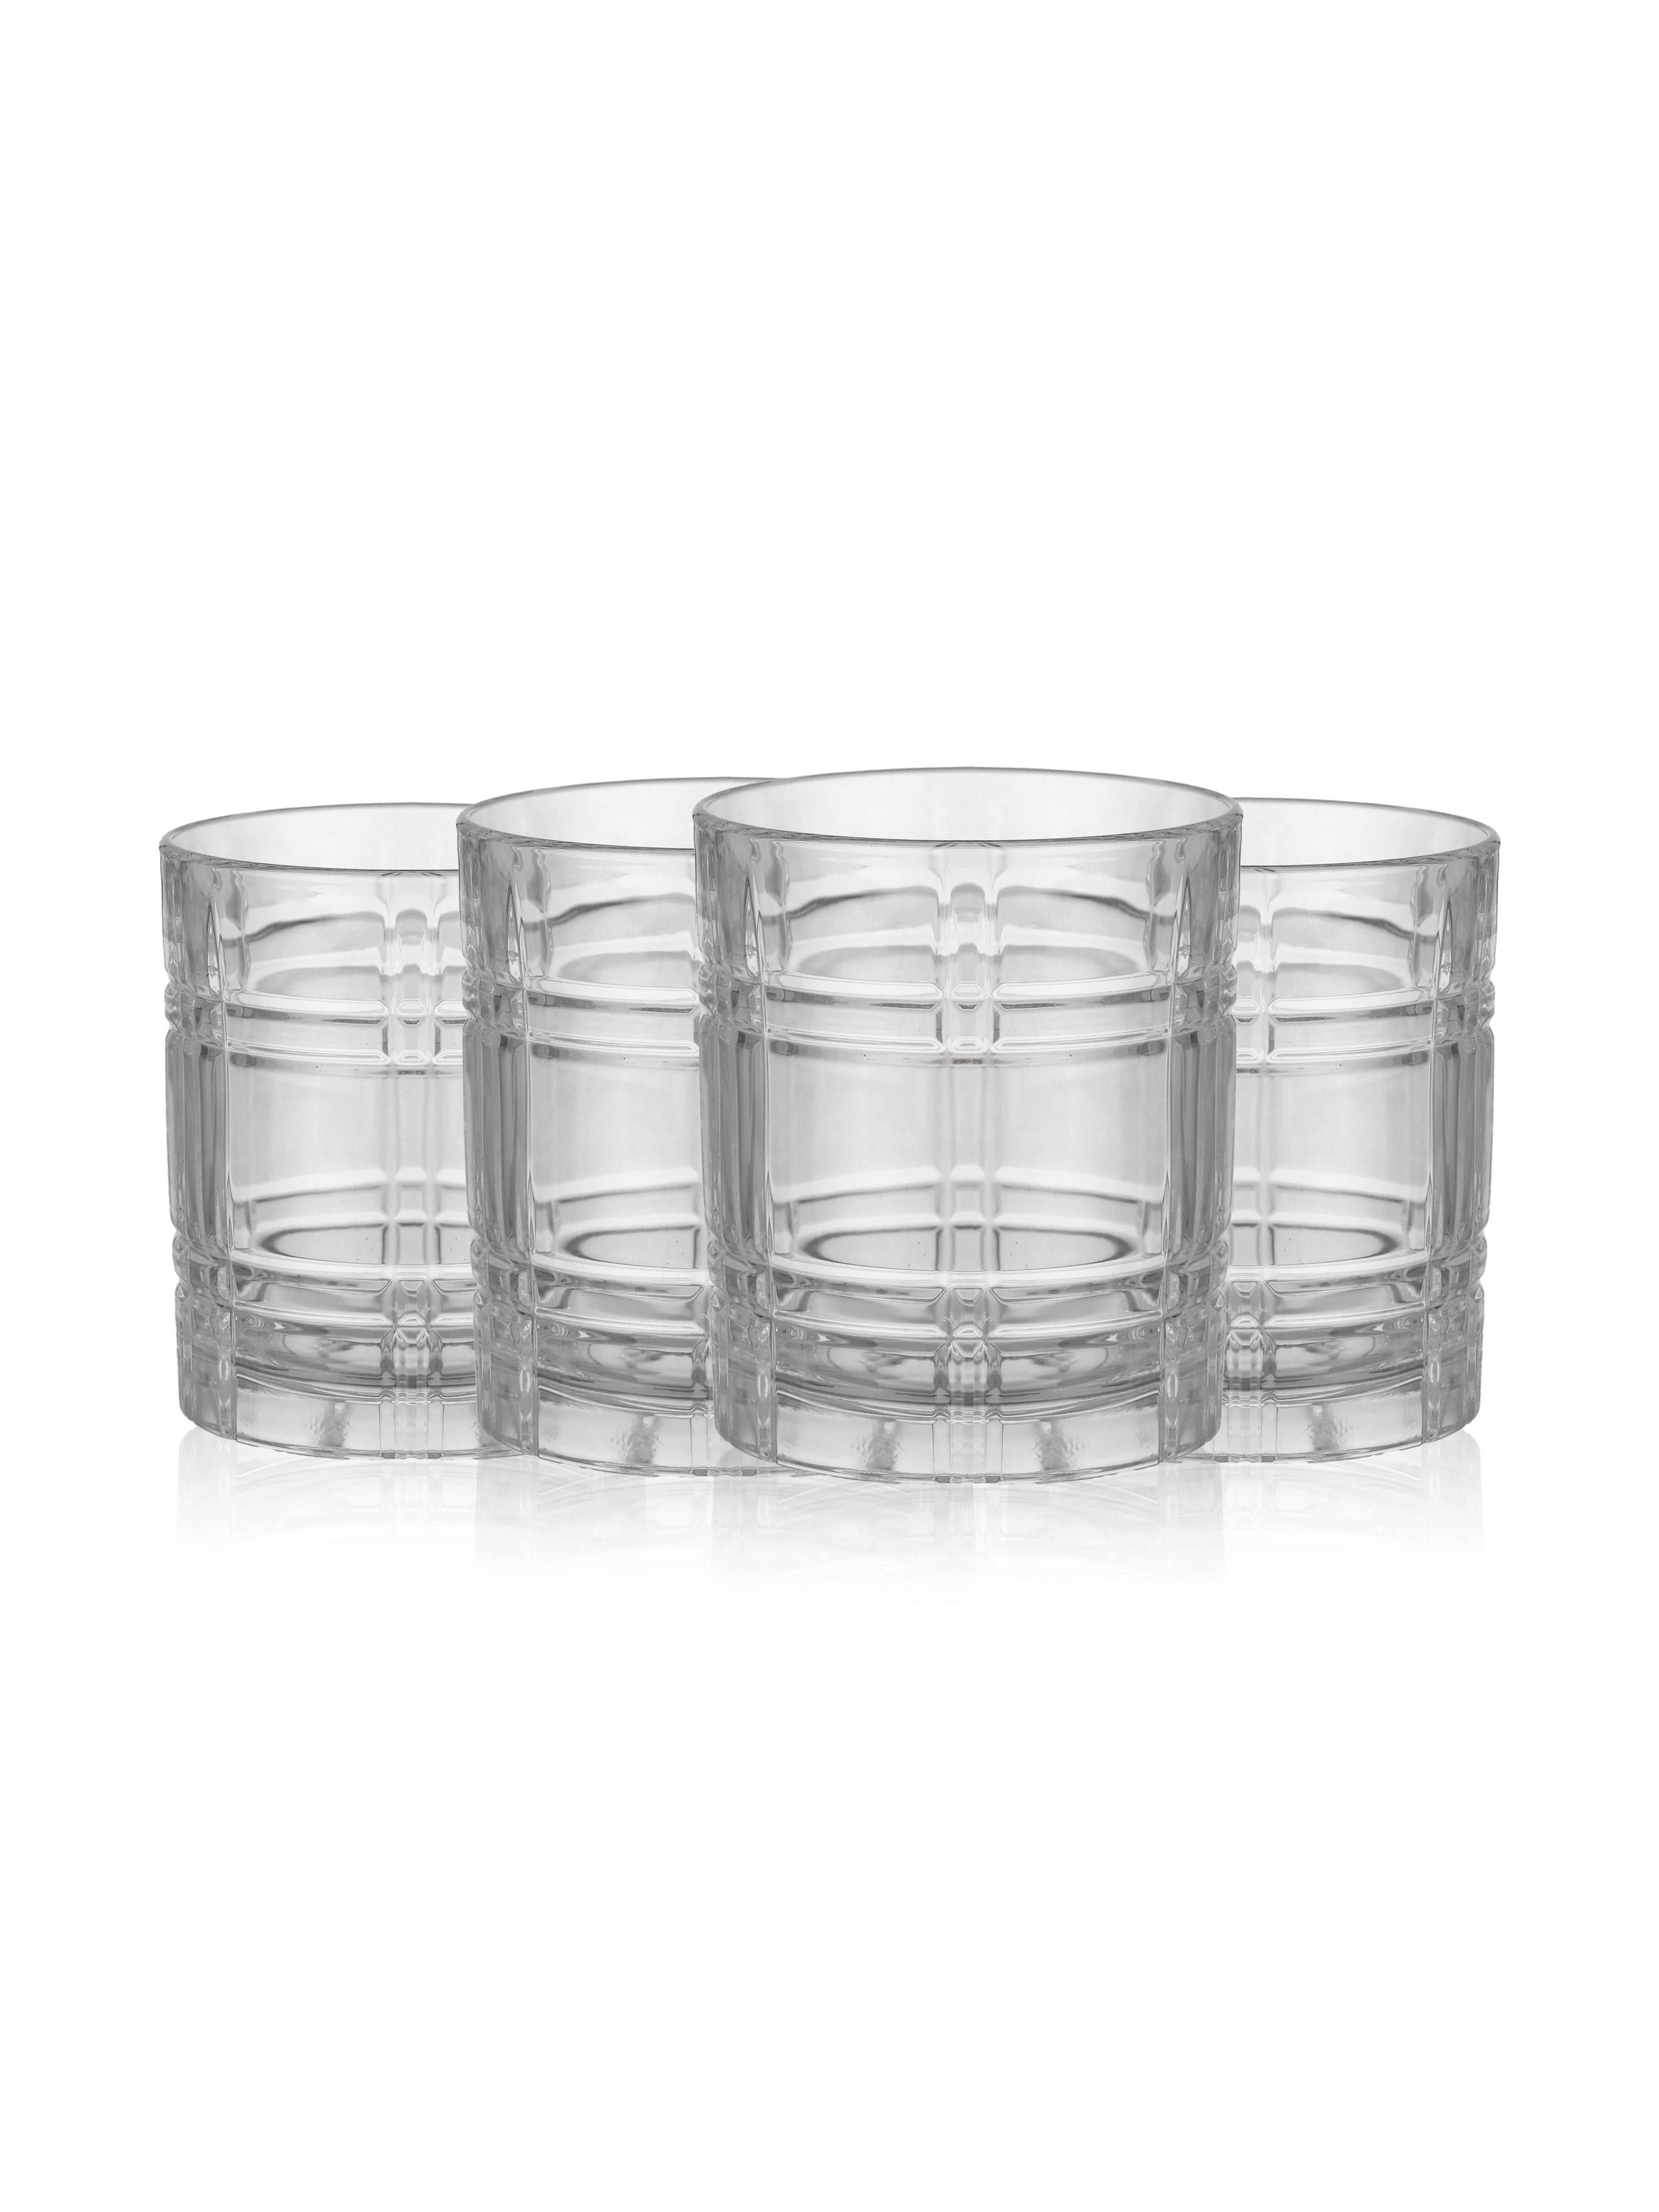 Luxury Crystal Old Fashioned Whisky Glass, Set of 6, 337 ML